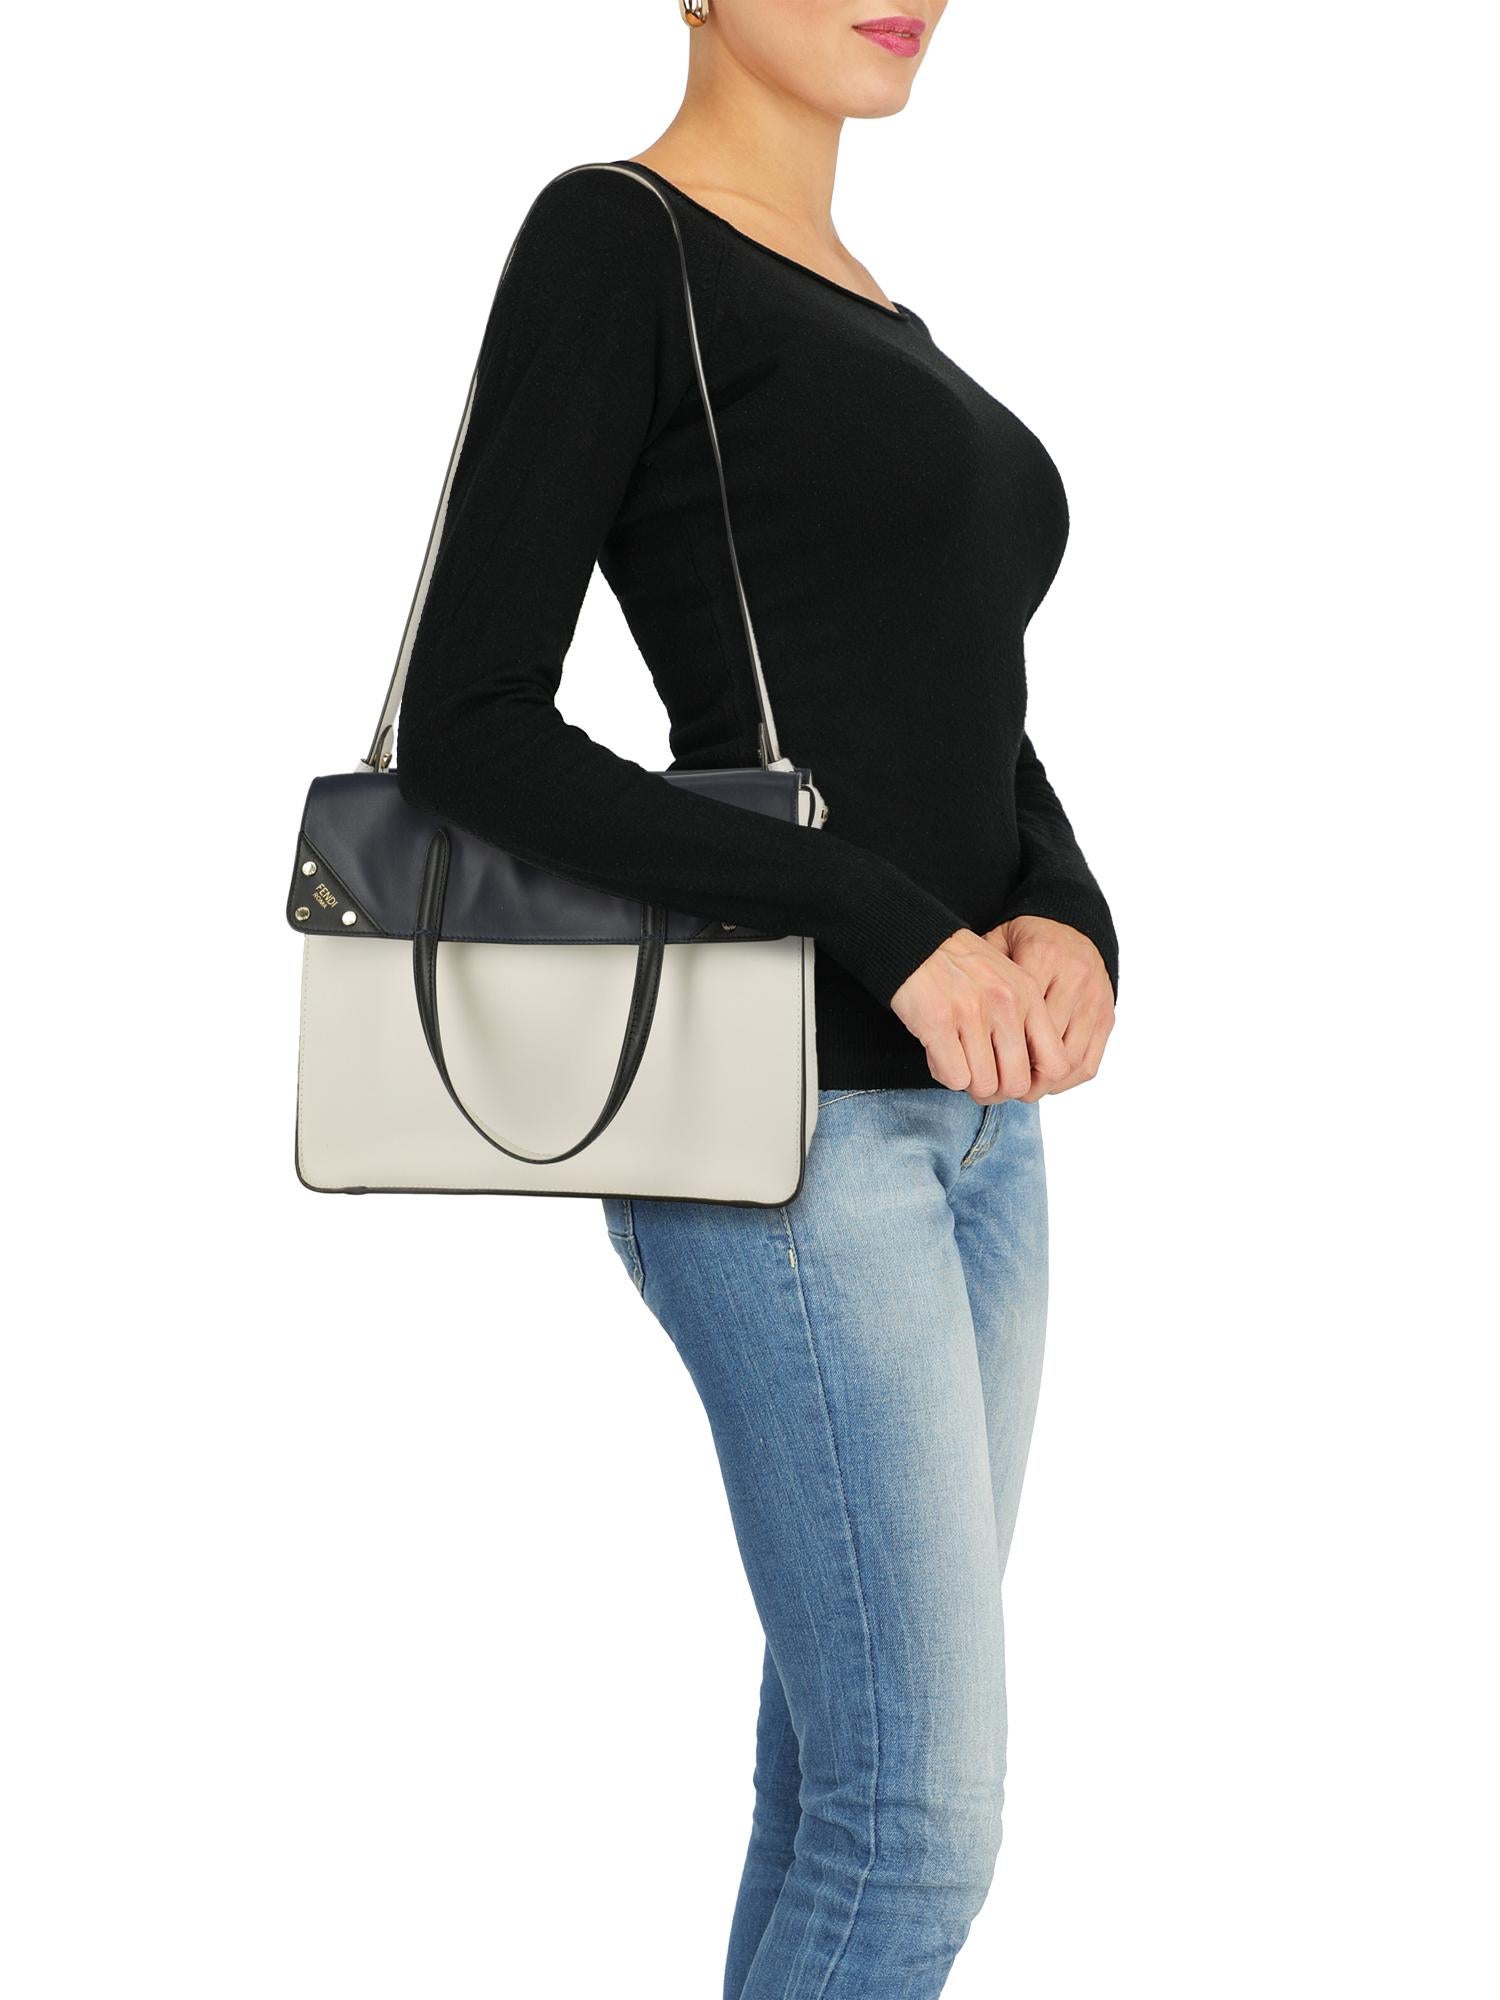 Product Description: Bag, leather, solid color, two-tone, logo print to the front, removable shoulder strap, gold-tone hardware, internal pockets, suede lining.

Includes:
 Shoulder strap

Product Condition: Excellent
Lining: negligible marks.